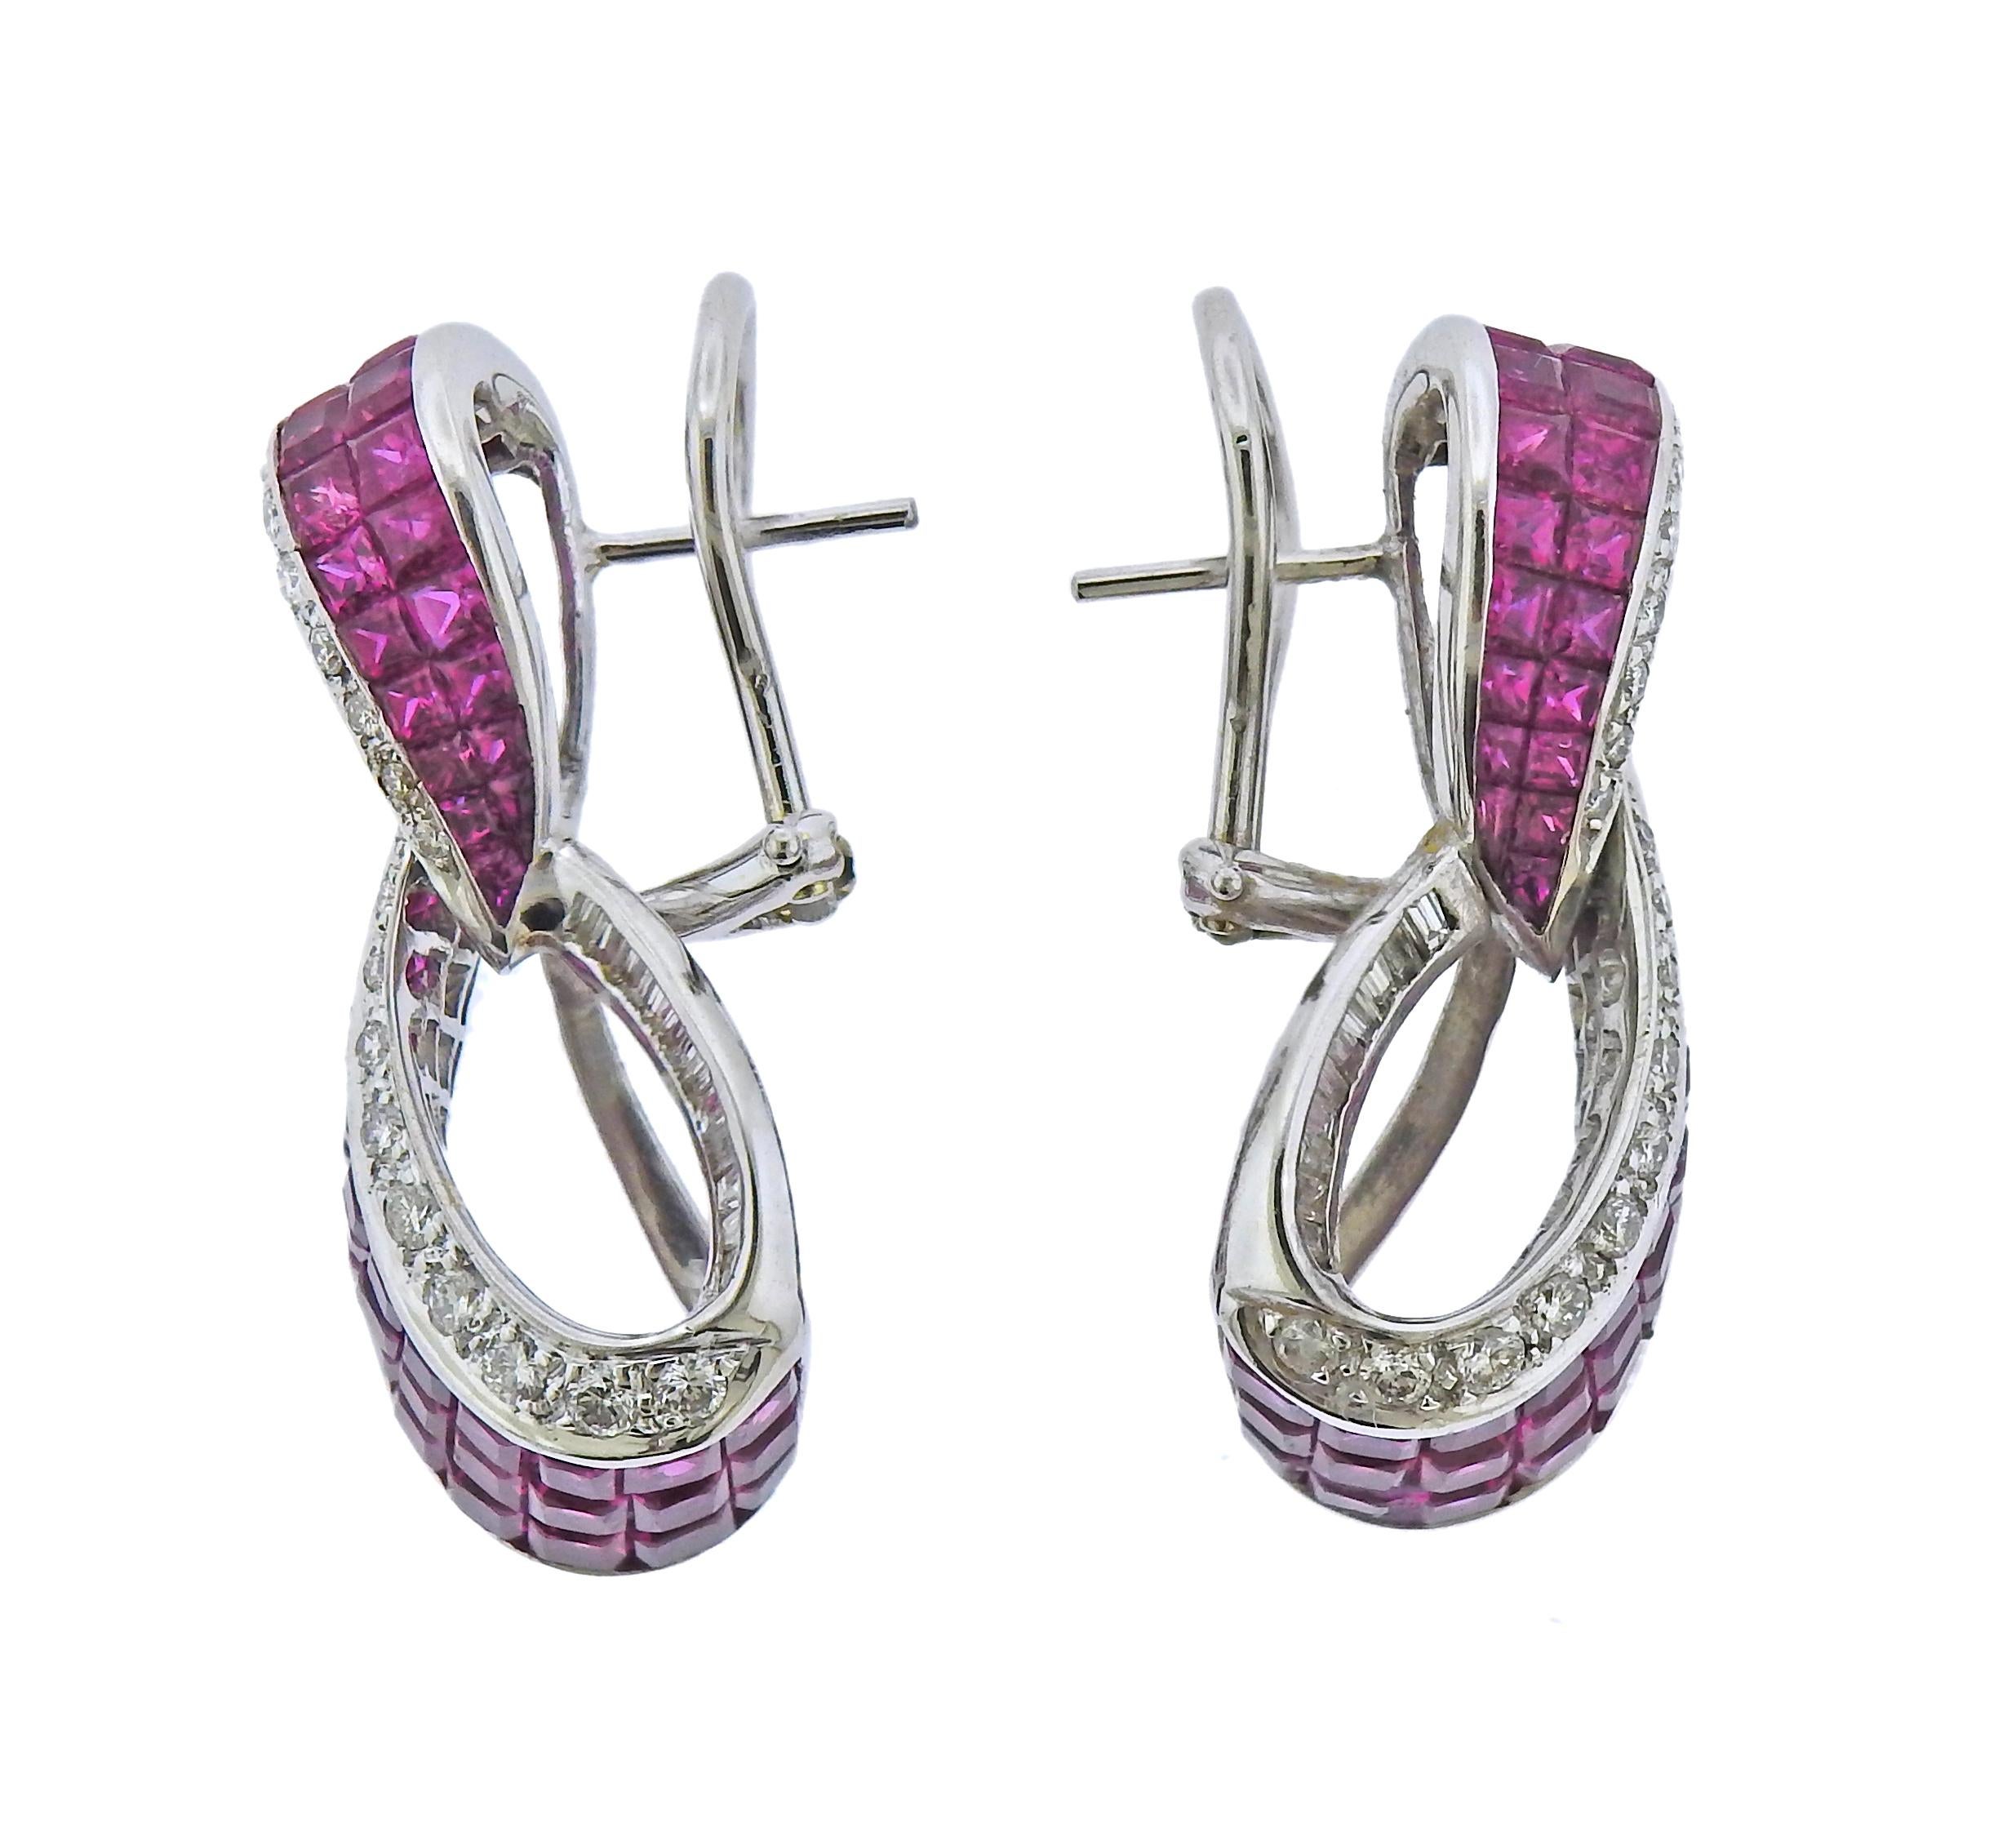 Pair of 18k white gold cocktail earrings, with invisible set rubies and approx. 060ctw in H/VS-SI1 diamonds. Earrings are 35mm x 15mm. Weight - 18.2 grams.